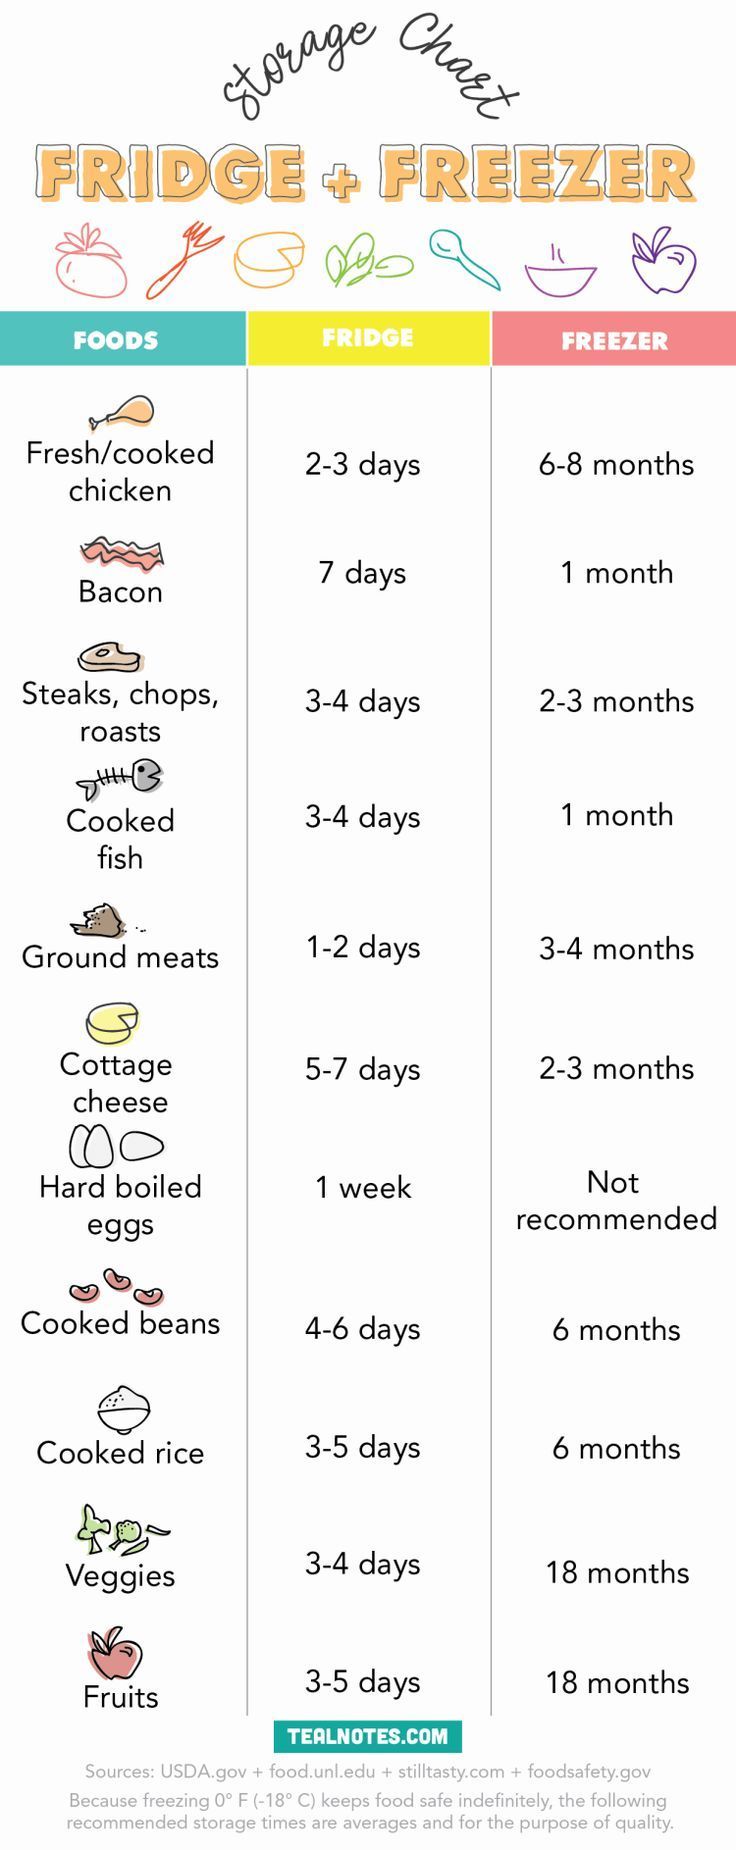 21 Easy Meal Prep Ideas— How To Meal Prep Starting This Week (A Guide) - 21 Easy Meal Prep Ideas— How To Meal Prep Starting This Week (A Guide) -   15 fitness Food week ideas